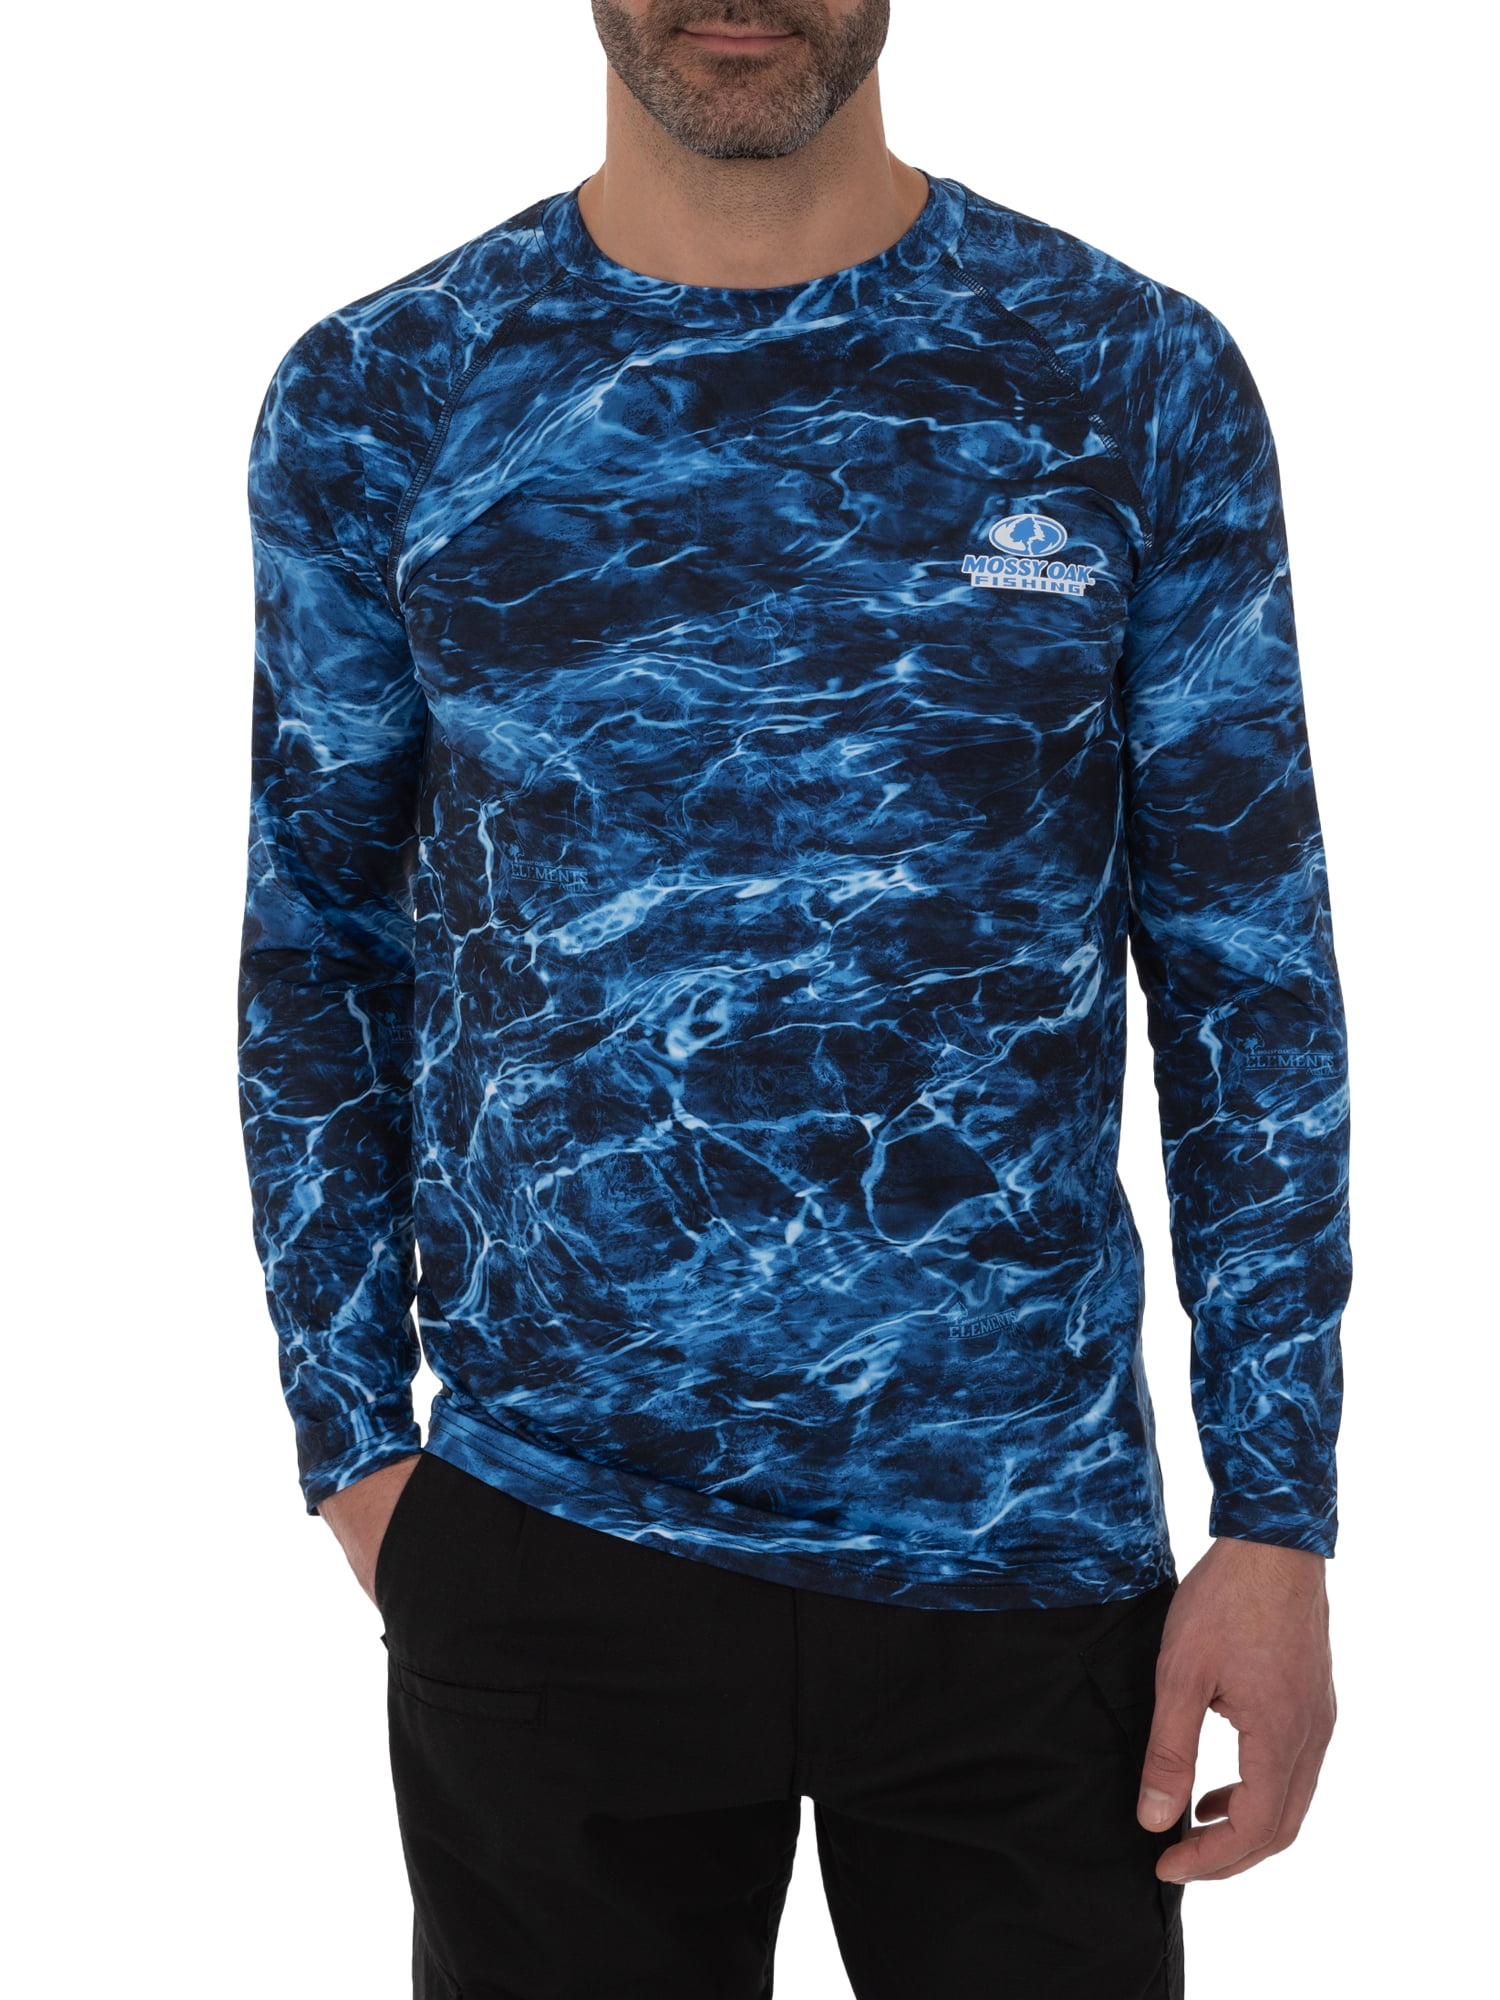 Mossy Oak Long Sleeve Fishing Tee with Insect Repellent - Mossy Oak Marlin,  3XL 